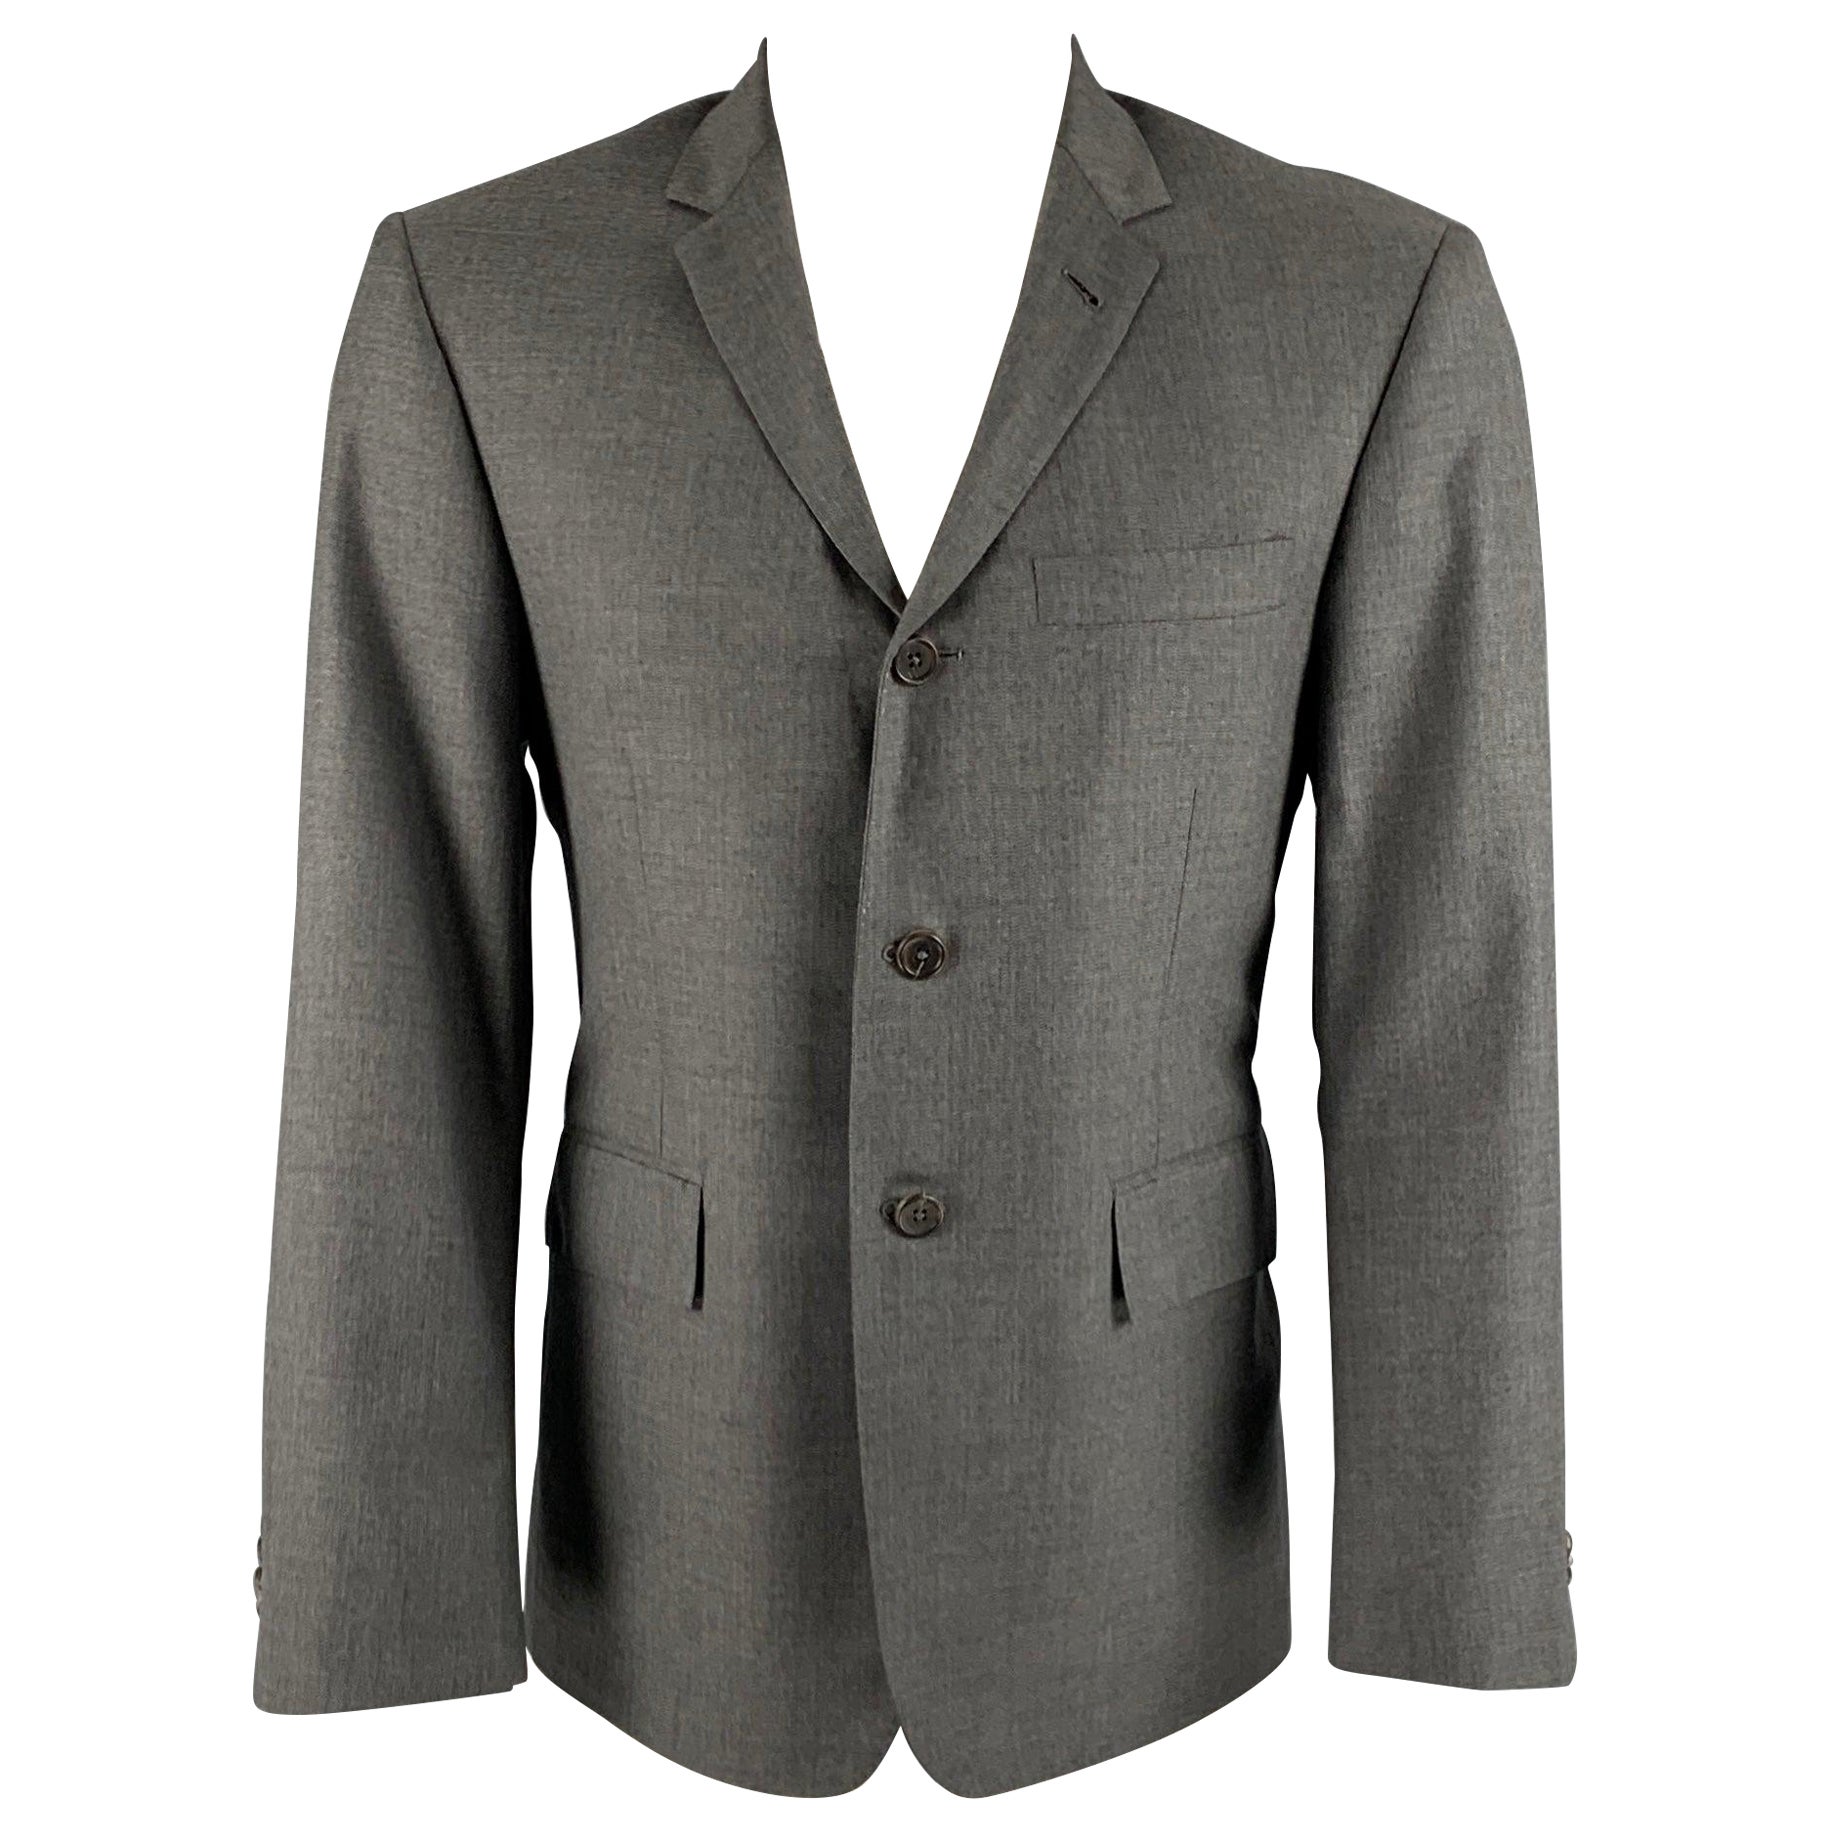 THOM BROWNE Size 40 Grey Tweed 3 button Sport Coat For Sale